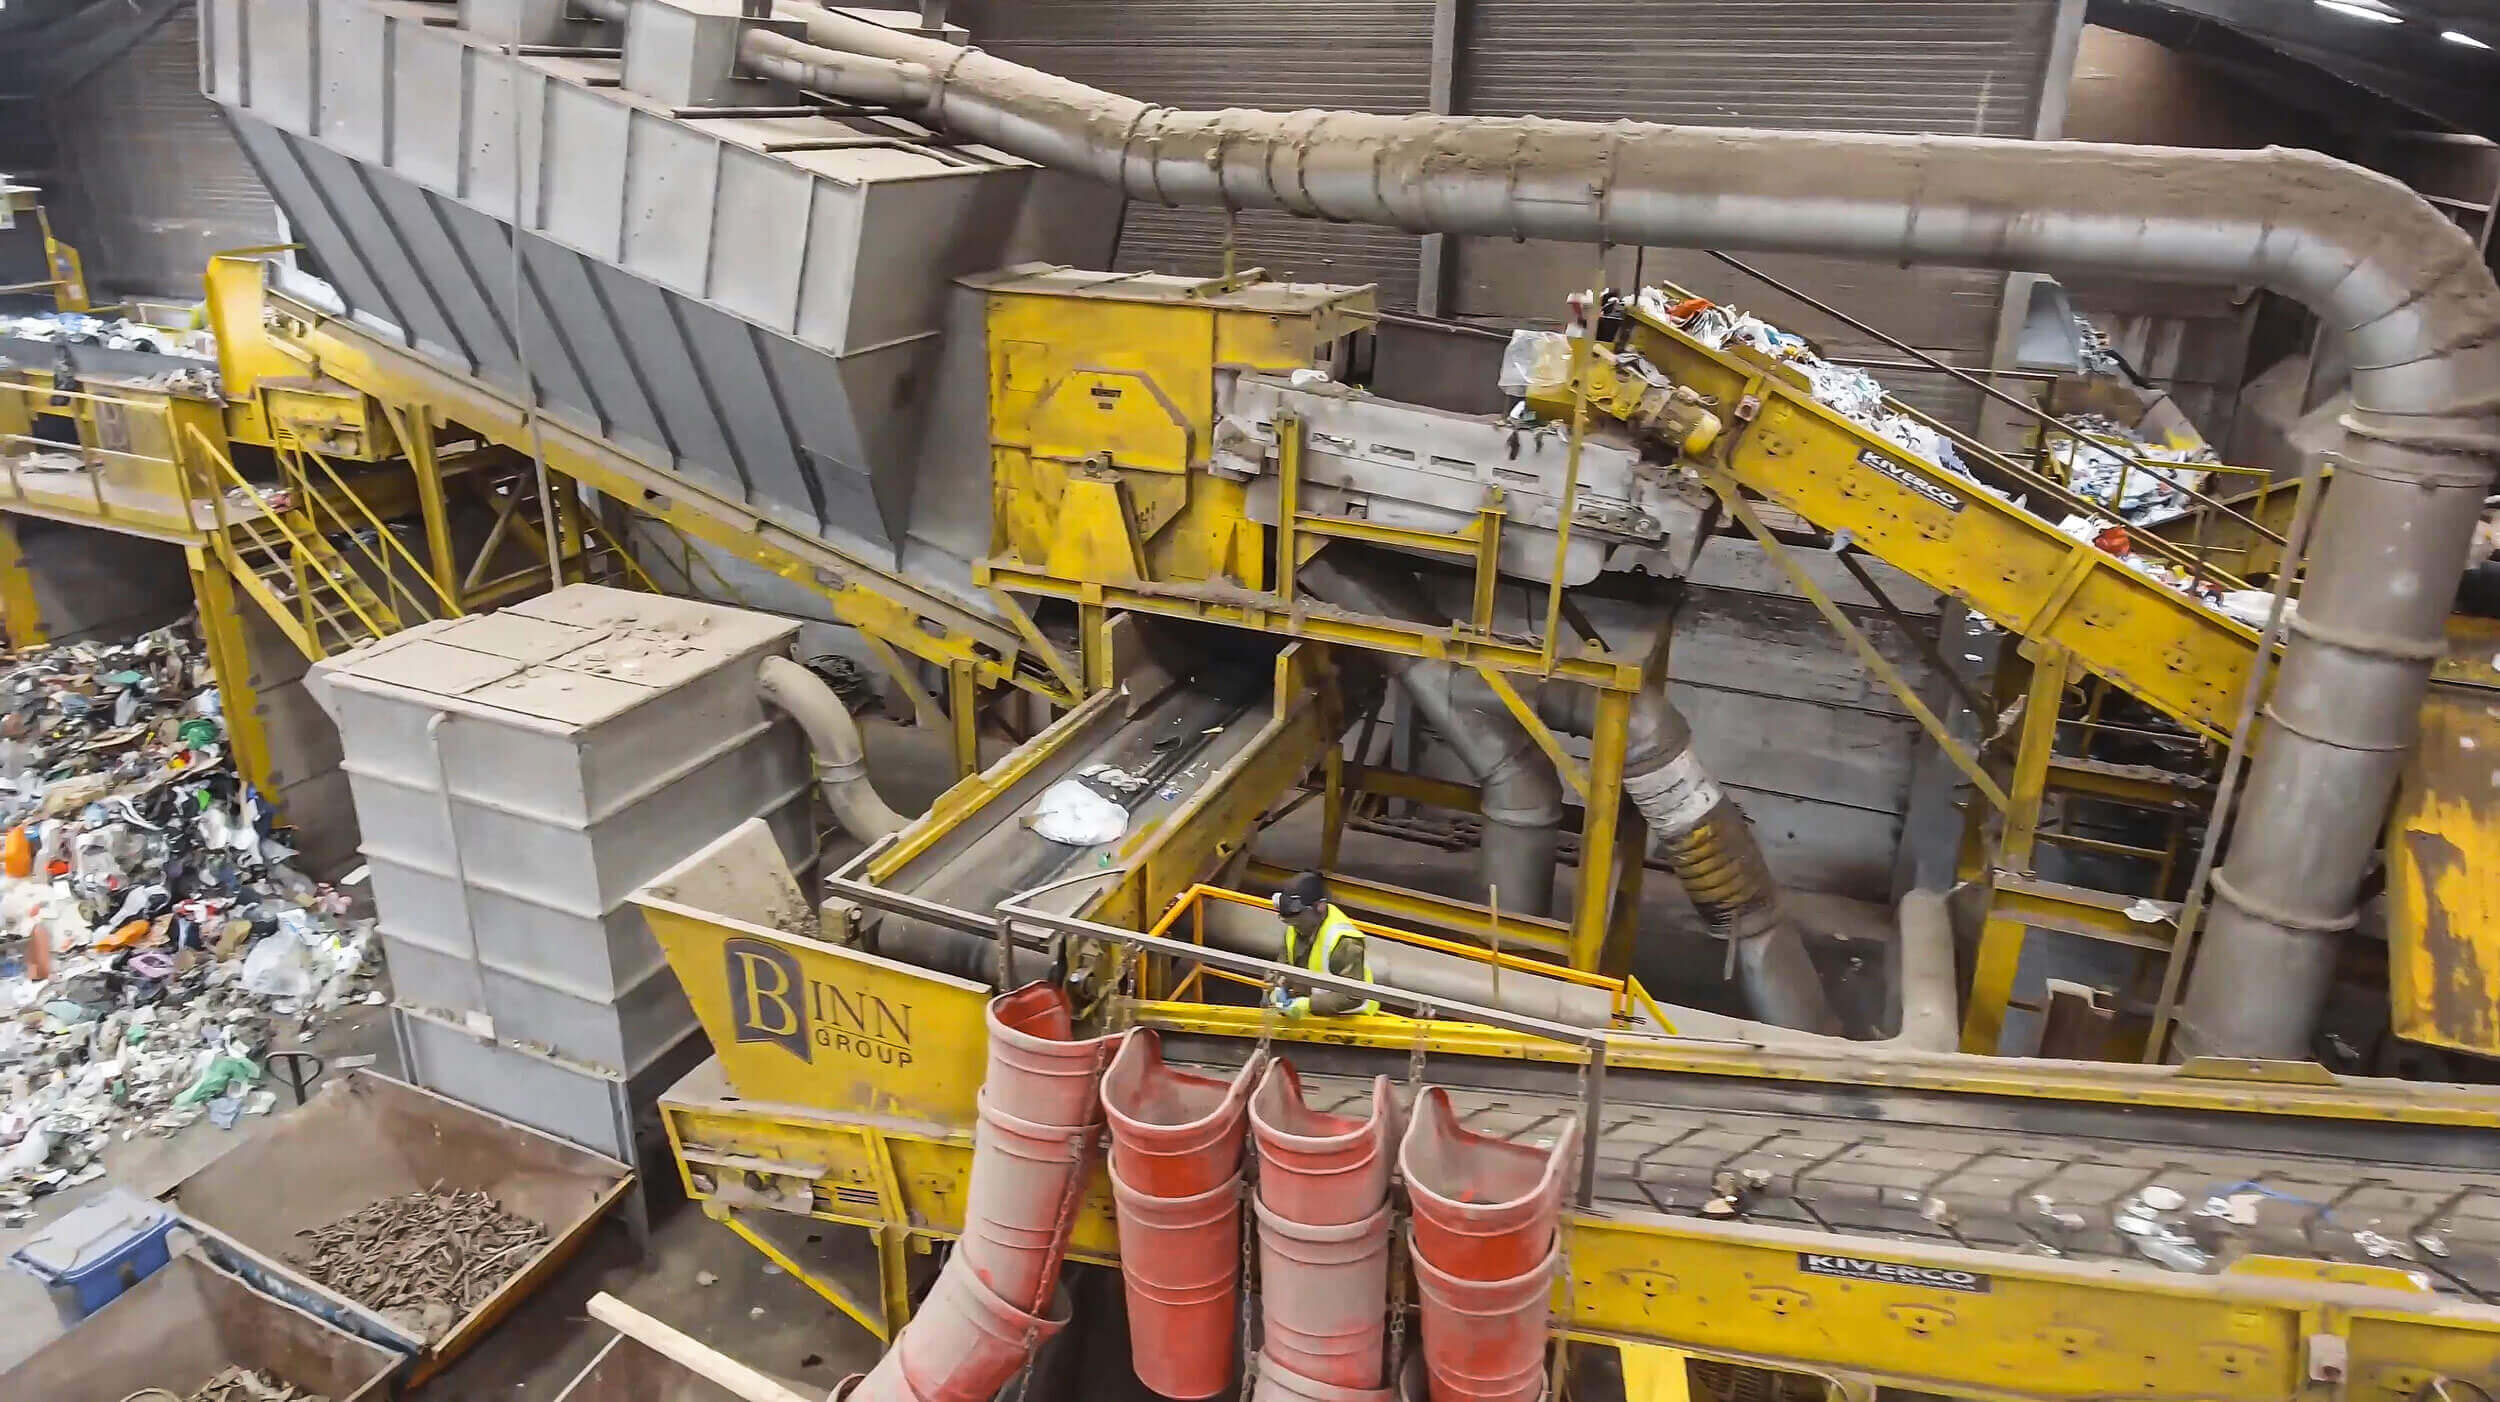 The conveyor belt system transports materials that were screened by the wind sifter to the picking station.